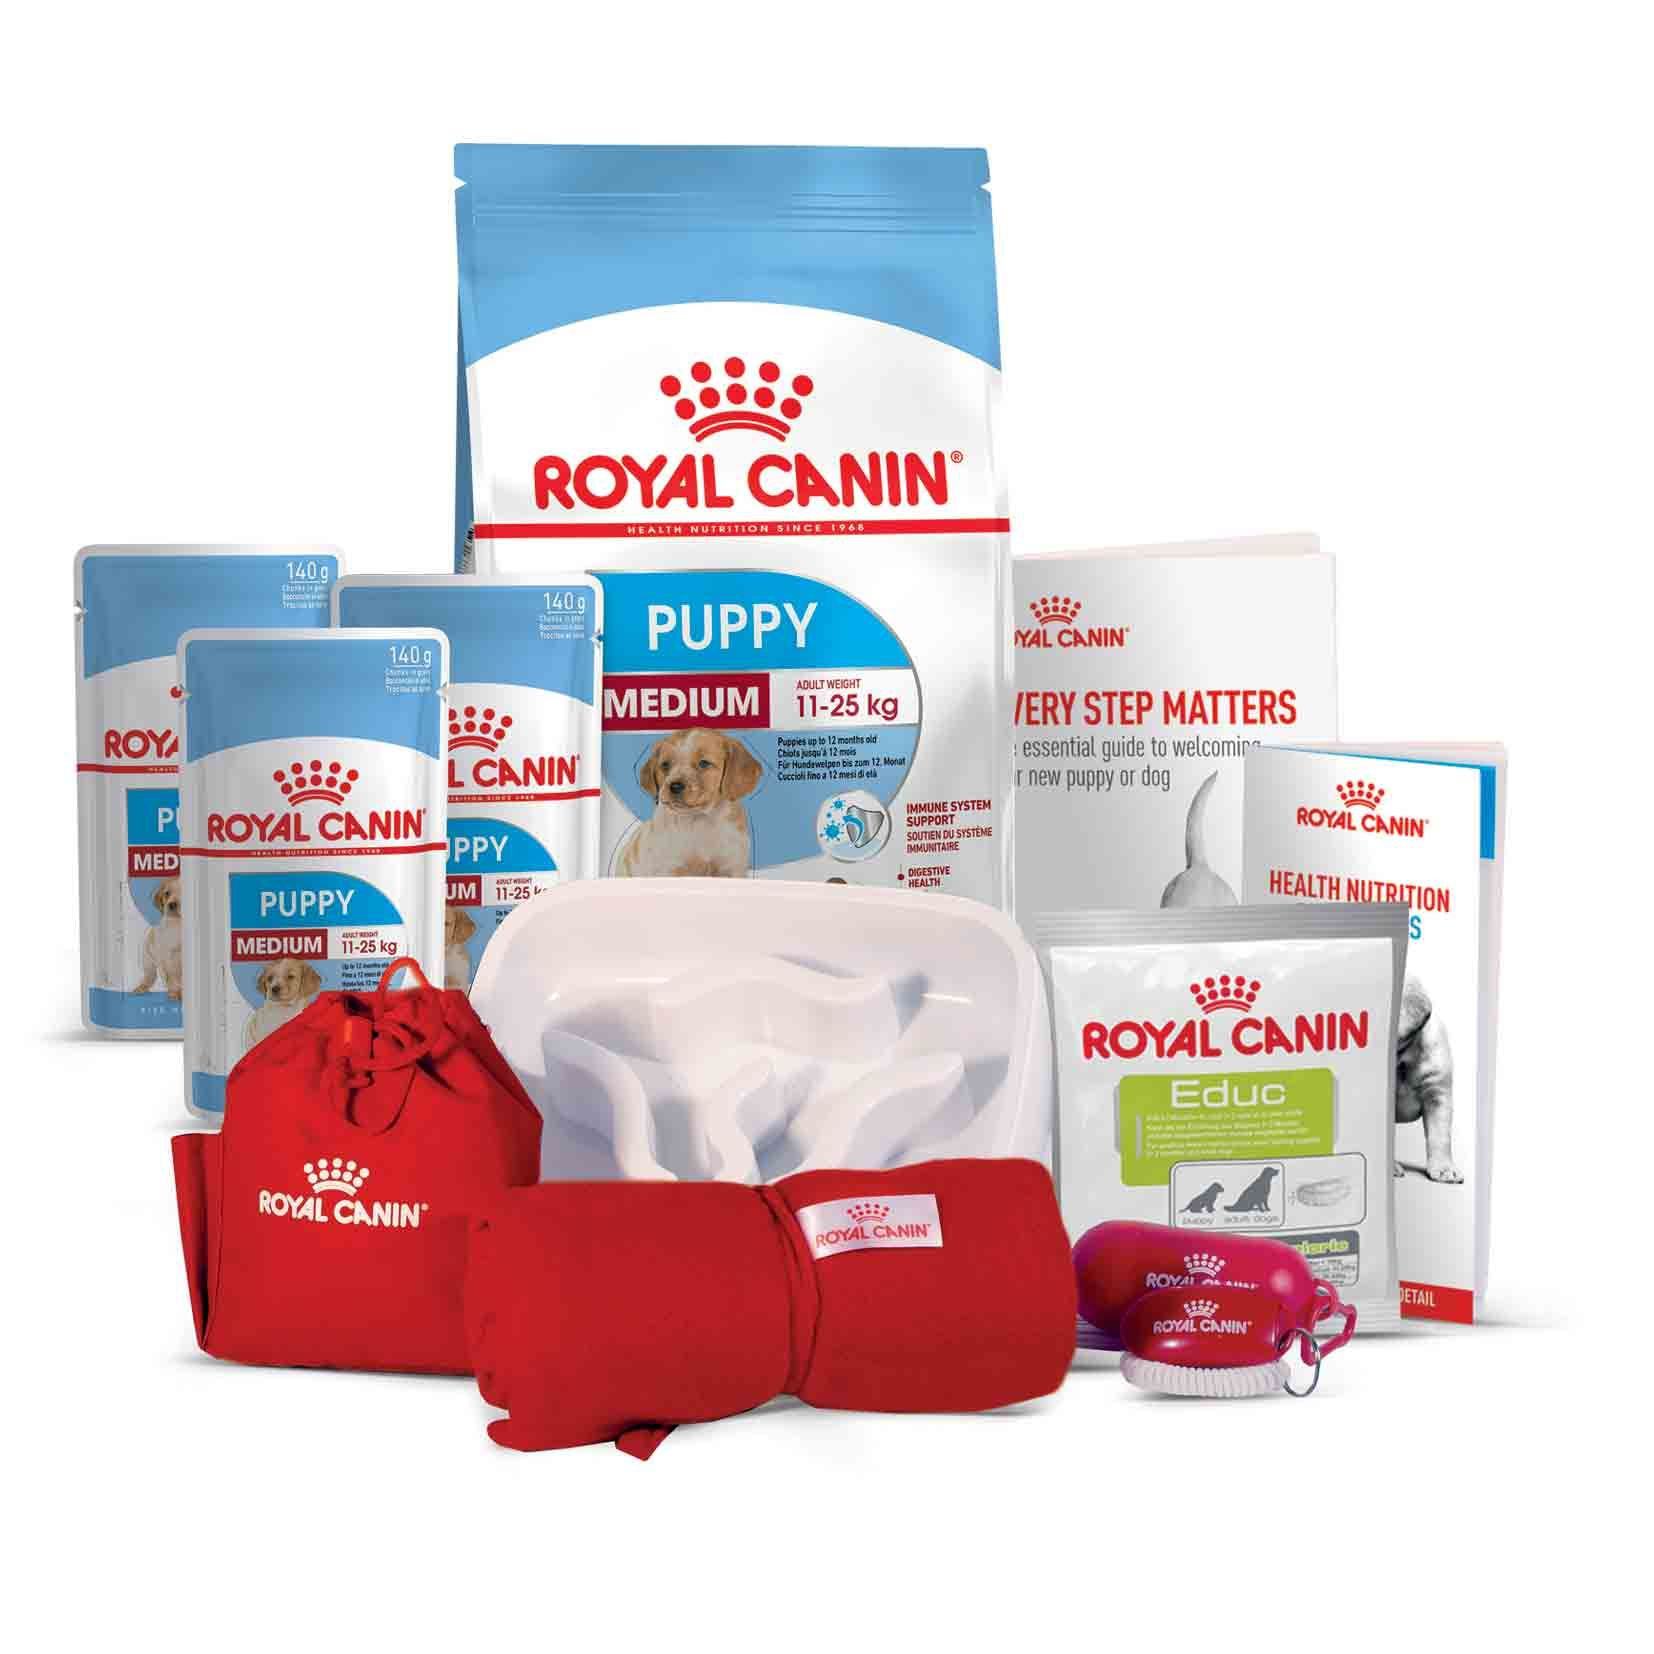 Royal Canin Puppy Pack £10 instore Pets at home